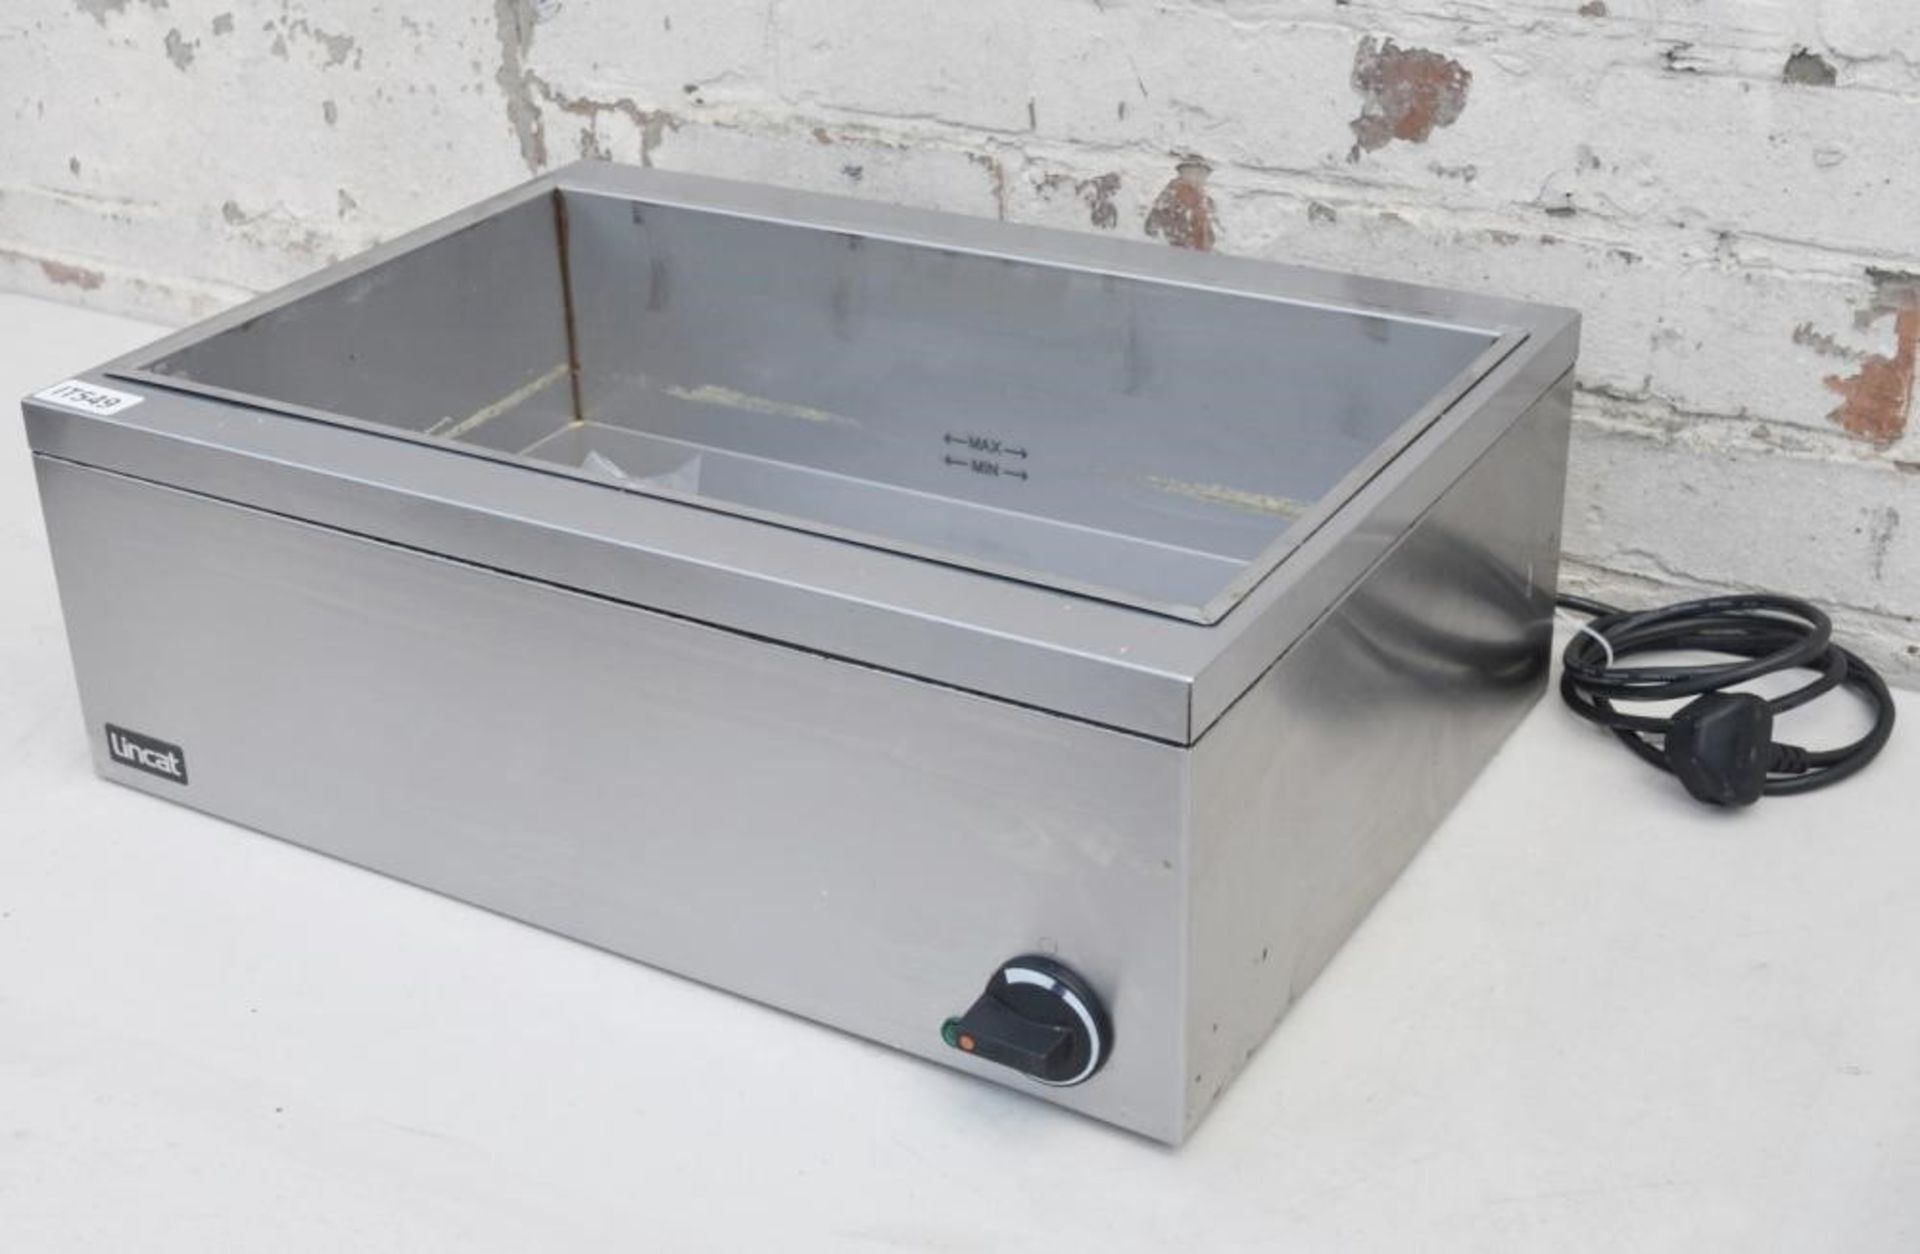 1 x LINCAT Commercial Bain Marie (Model: LBM2W) - 500W Wet And Dry Heat - Stainless Steel Finish - R - Image 5 of 7